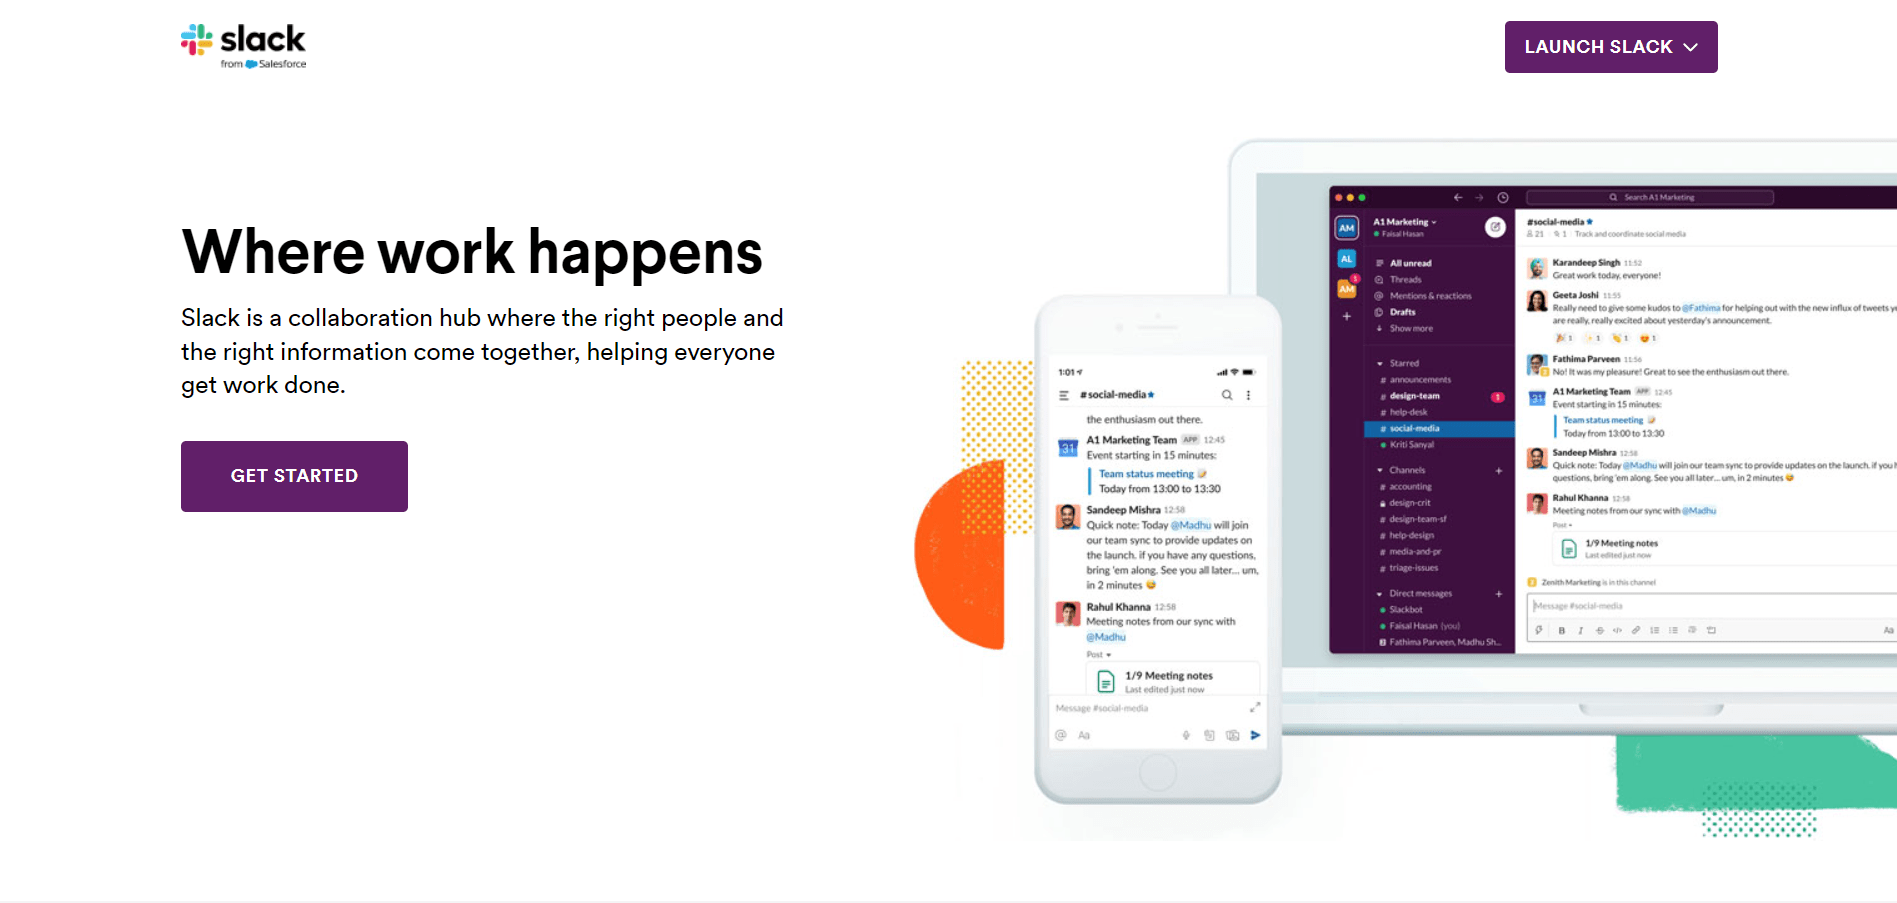 Slack's tagline is to the point 